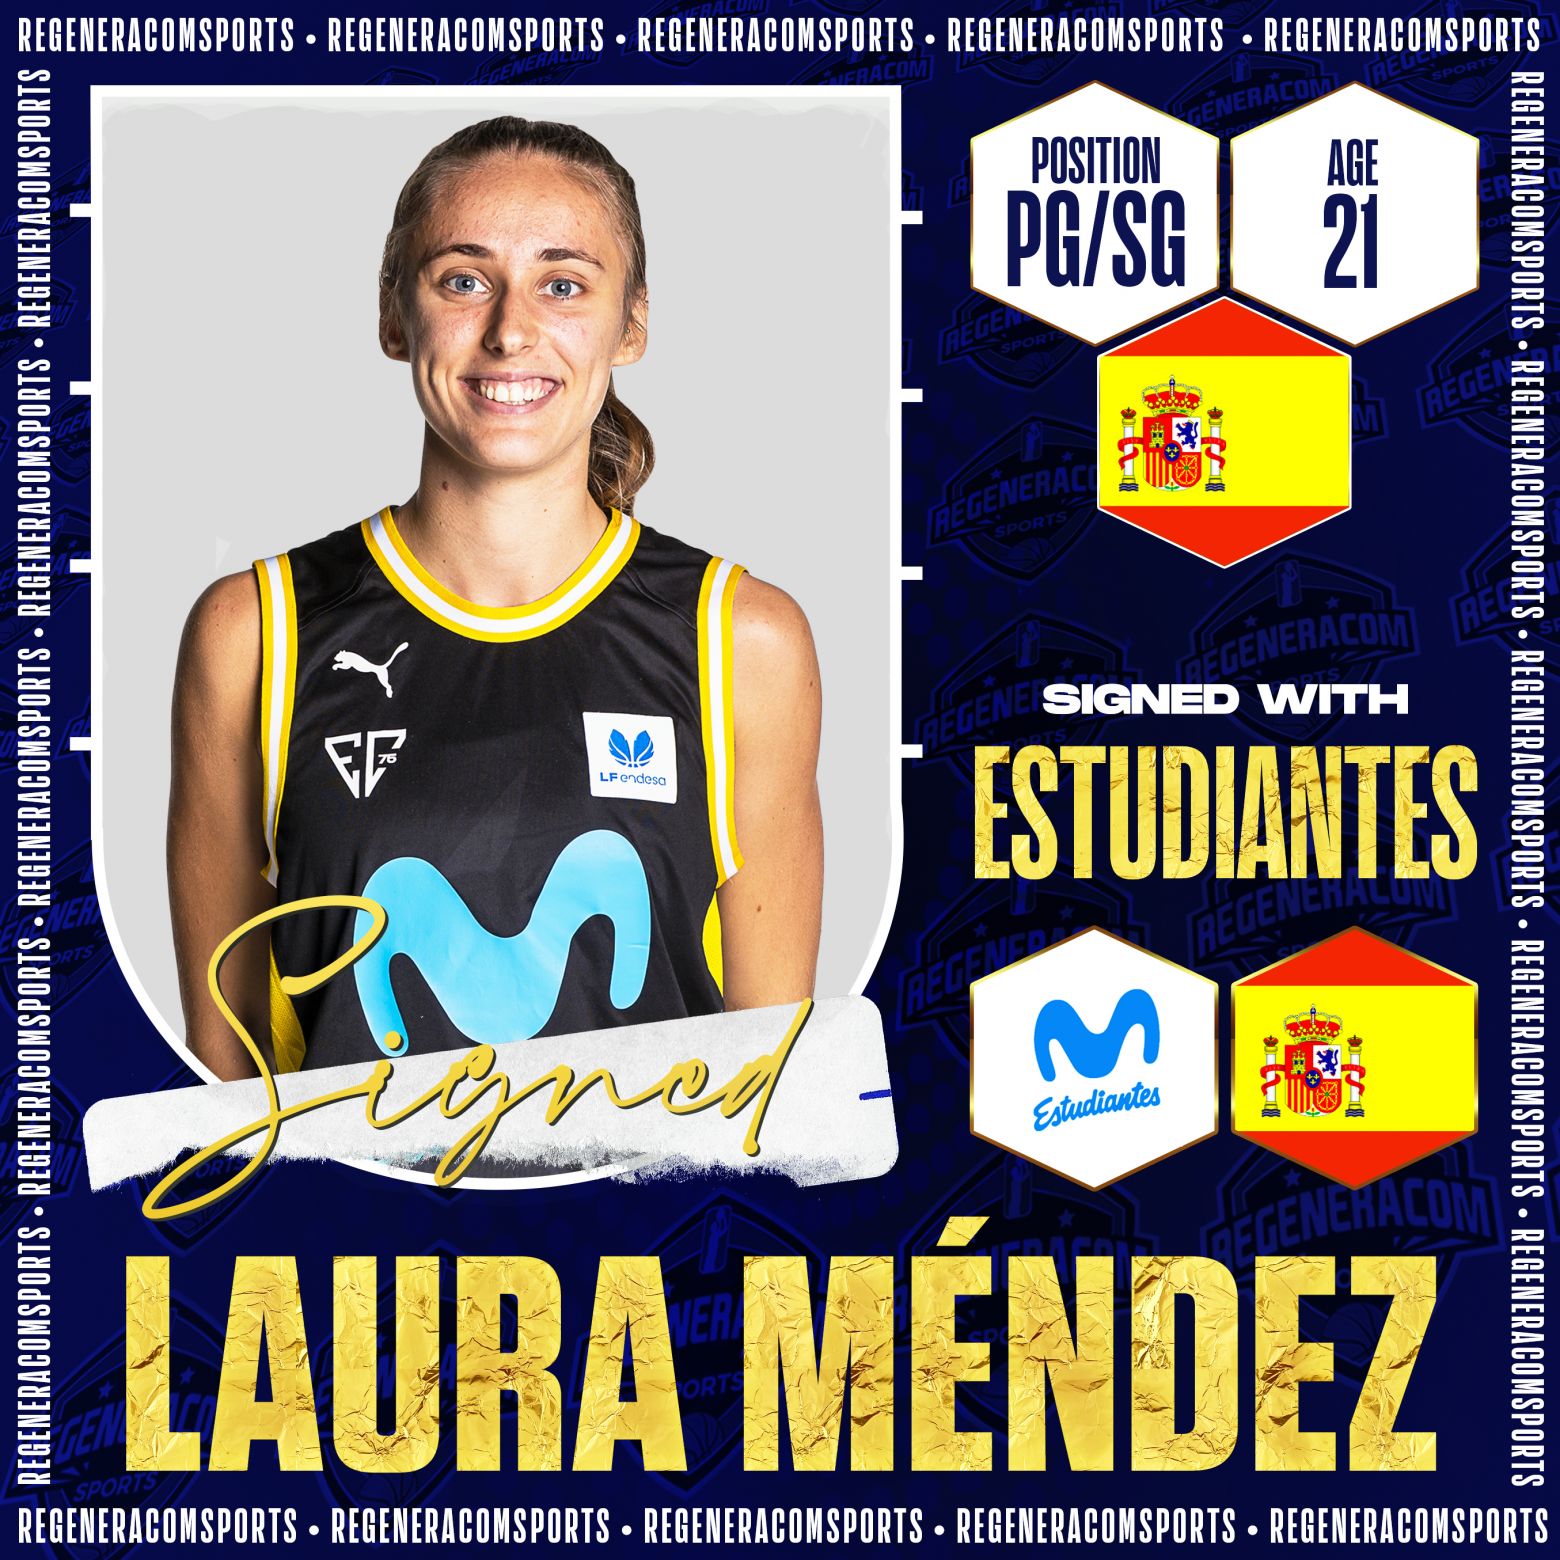 LAURA MÉNDEZ has re-signed with Estudiantes for the 2023/24 season